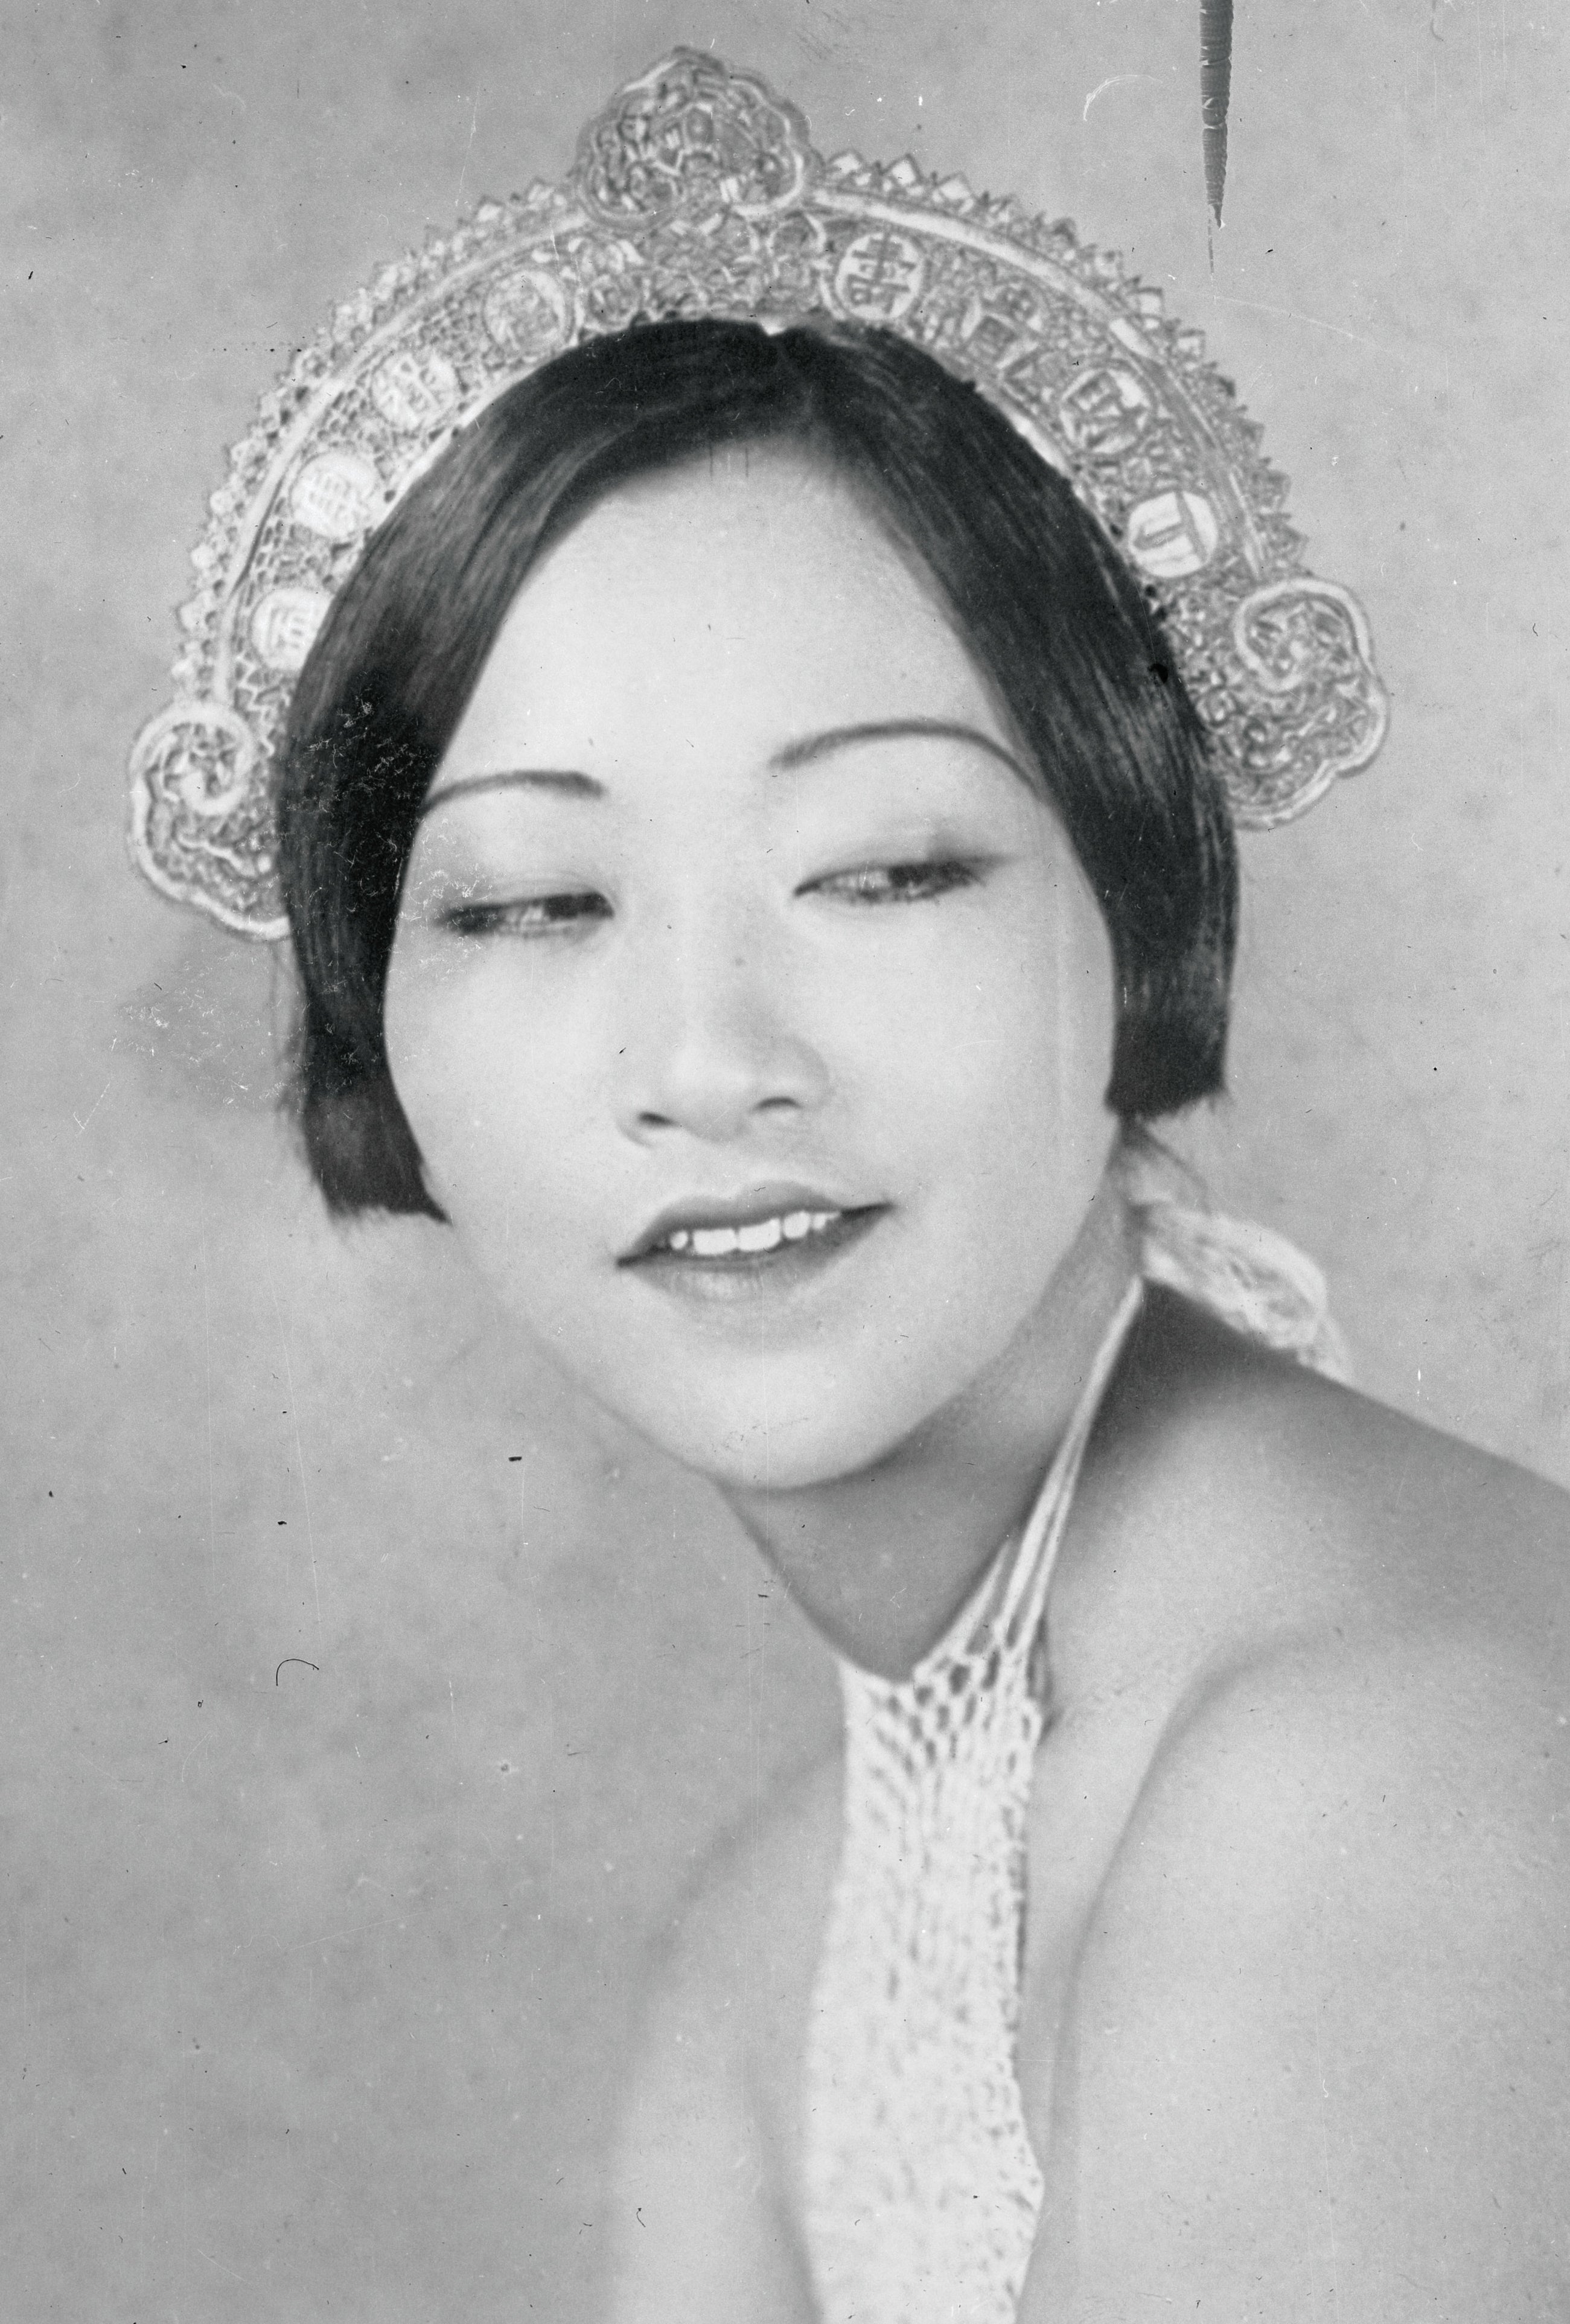 Anna May Wong smiling and looking down and left, wearing an ornate headpiece on her short dark hair